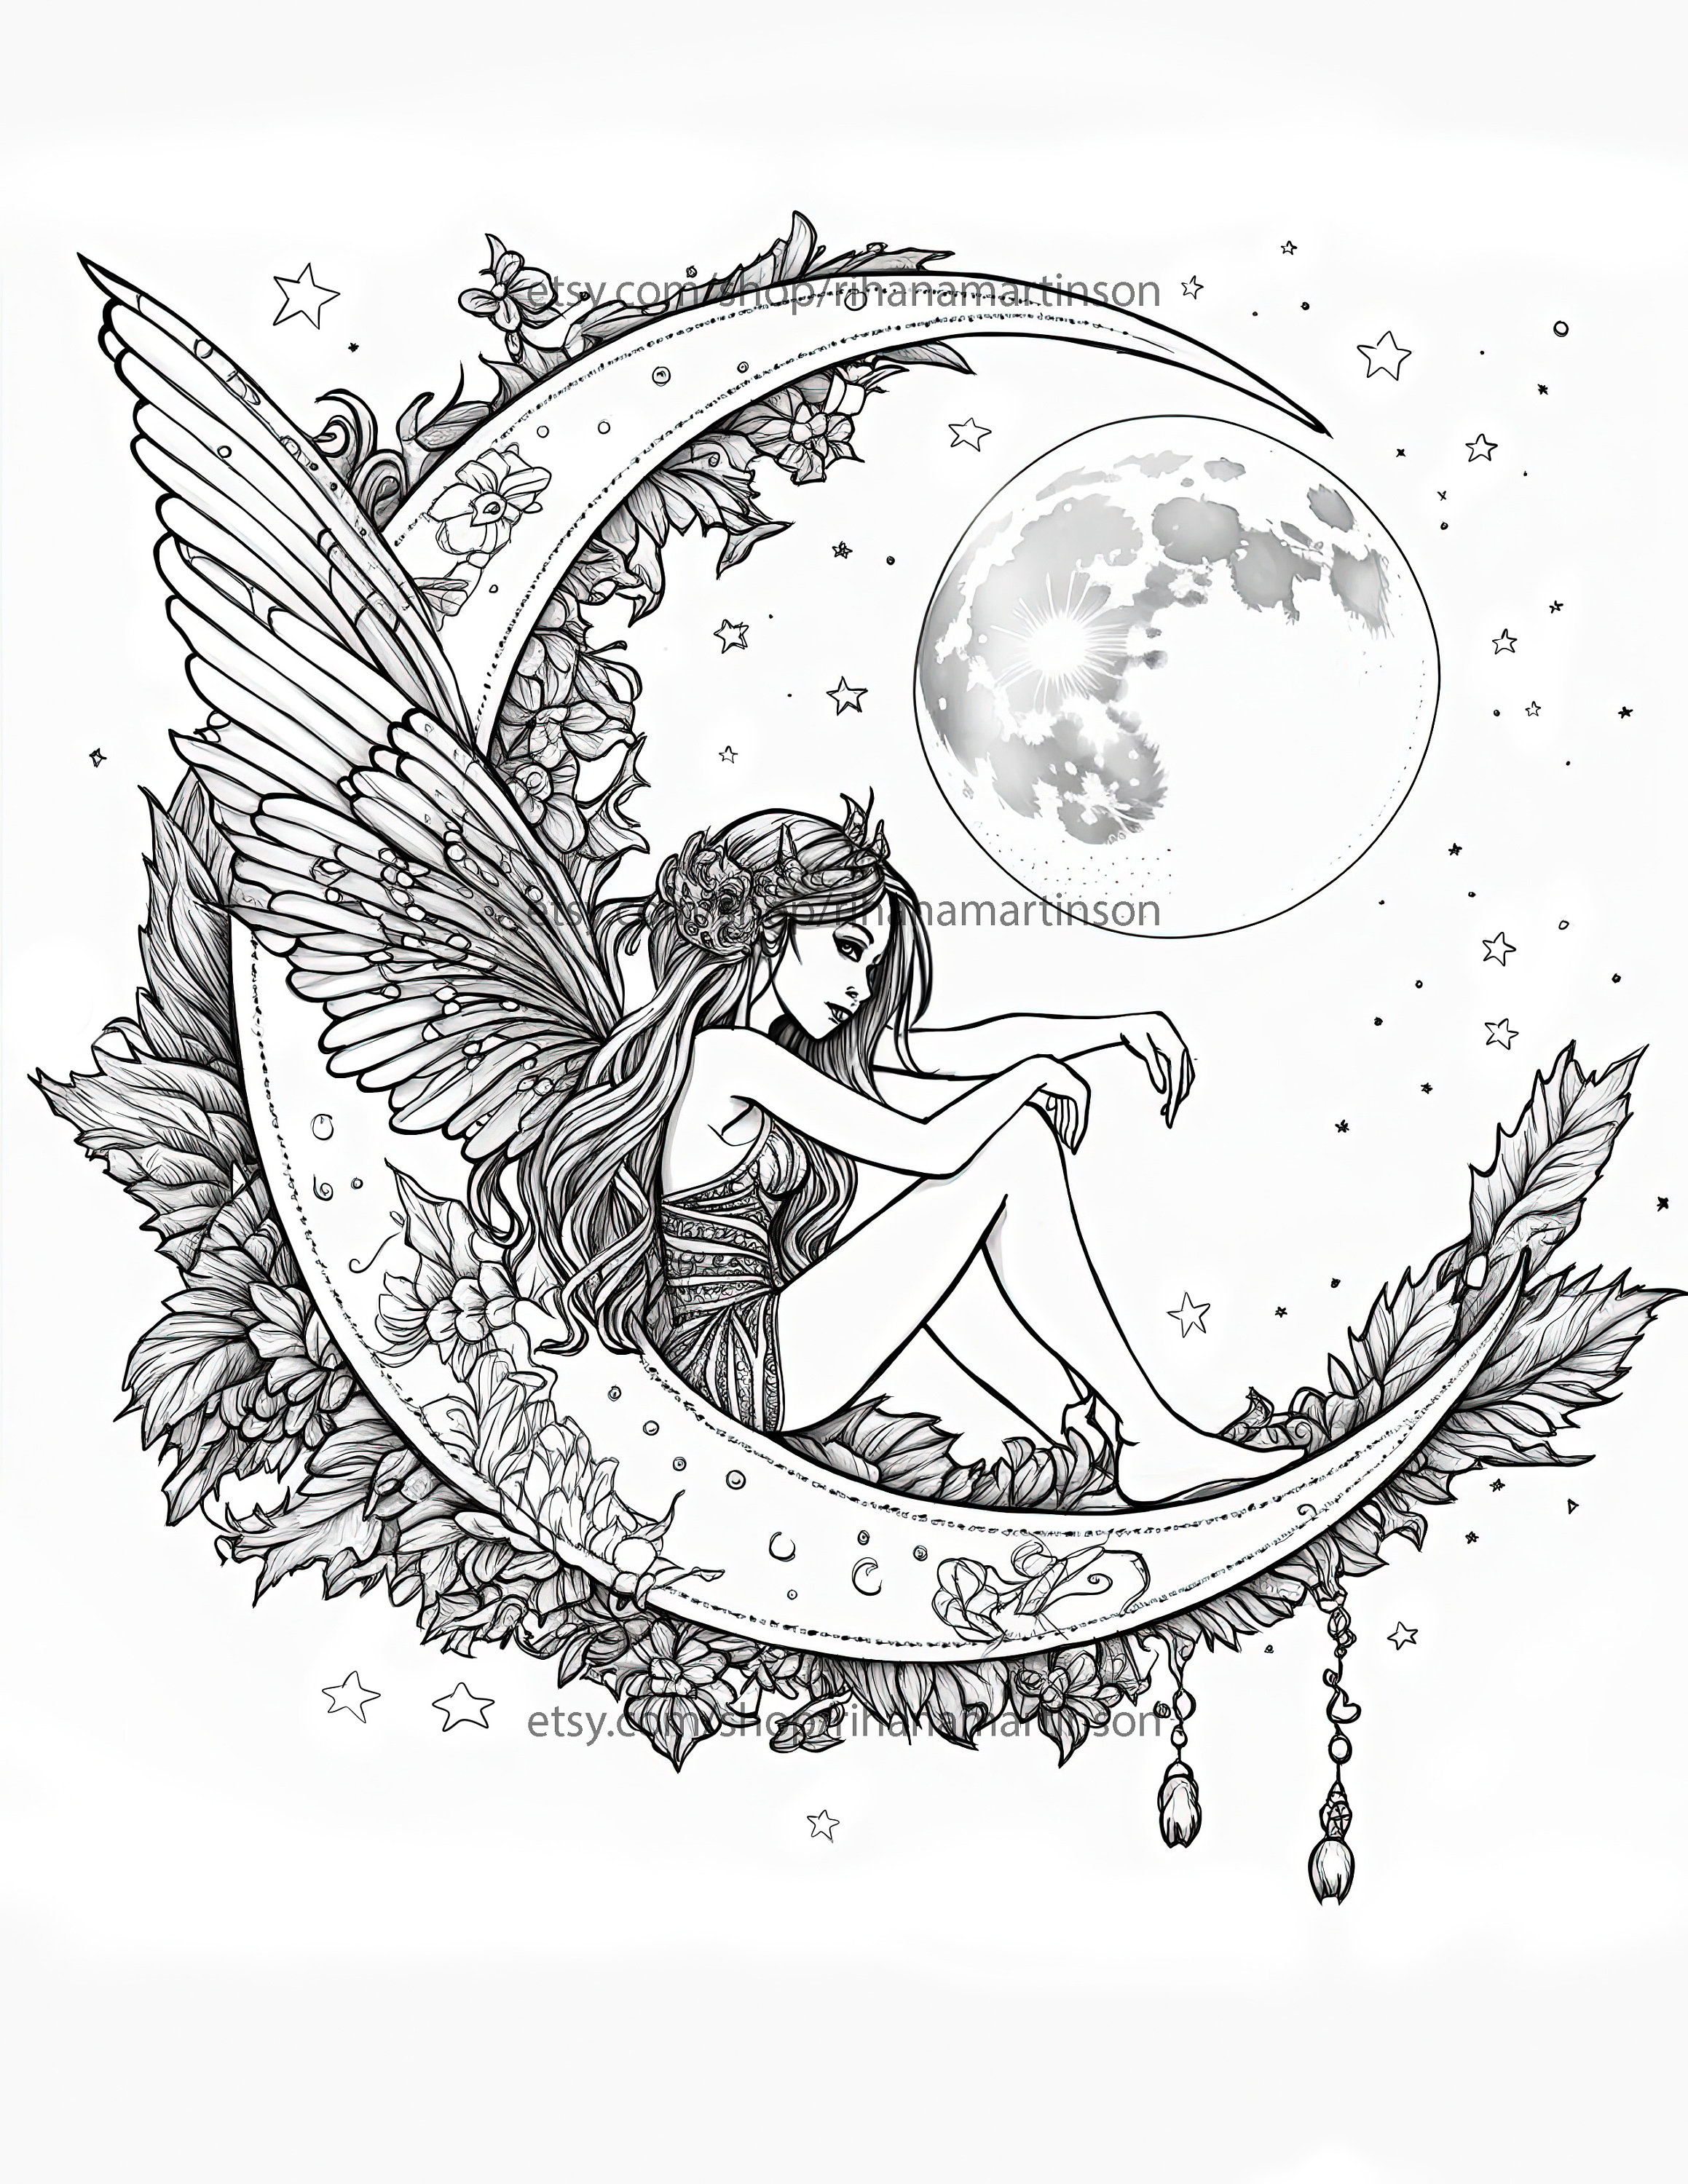 Fantasy fairy printable adult coloring book page ornate crescent moon